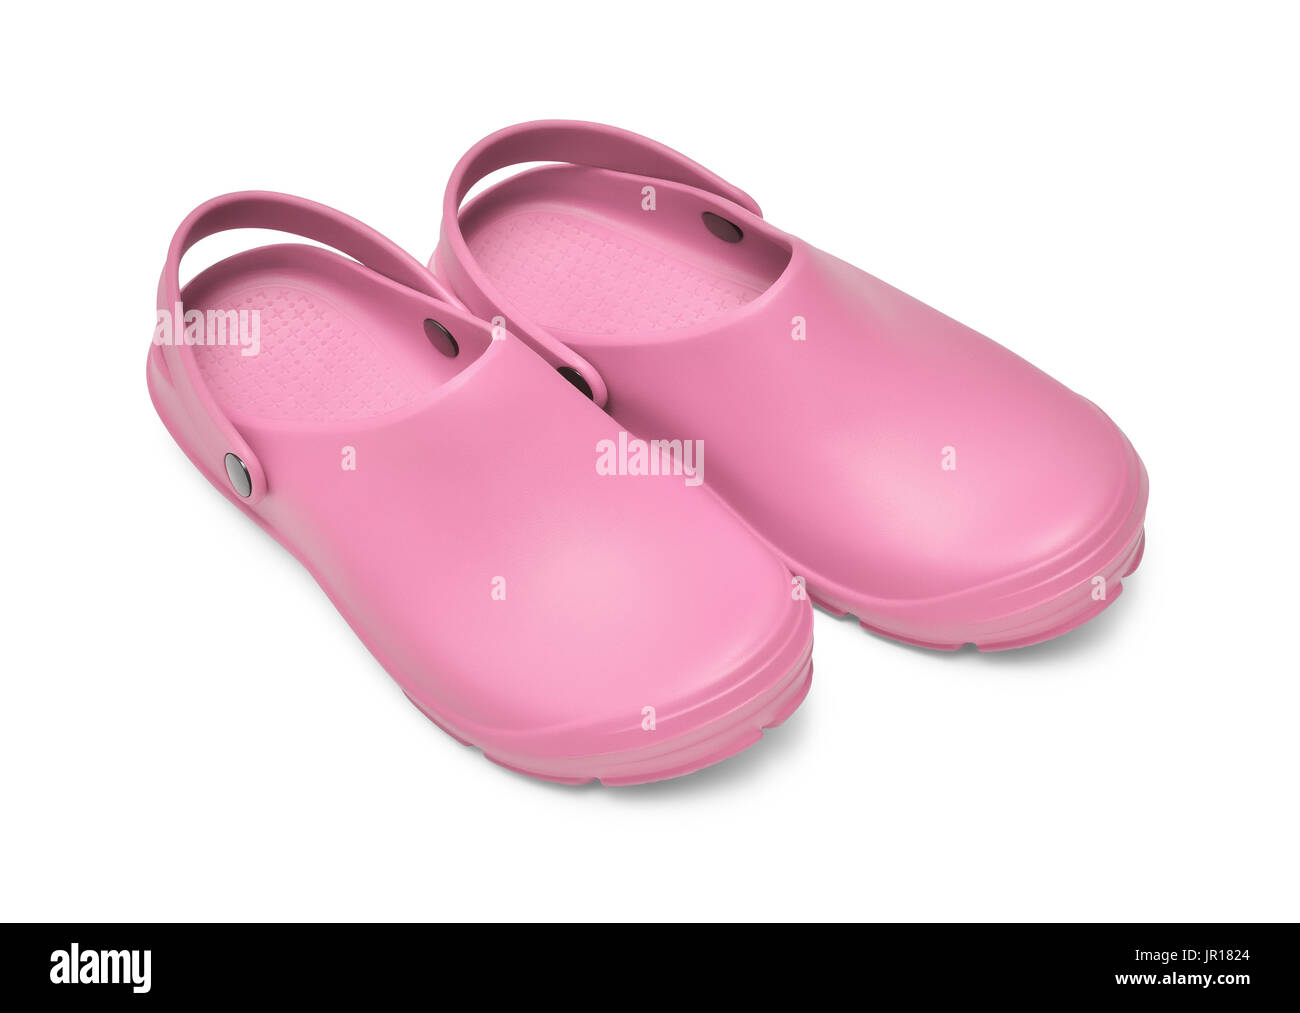 Crocs shoes. A pair of pink clogs isolated on white background w/ path Stock Photo